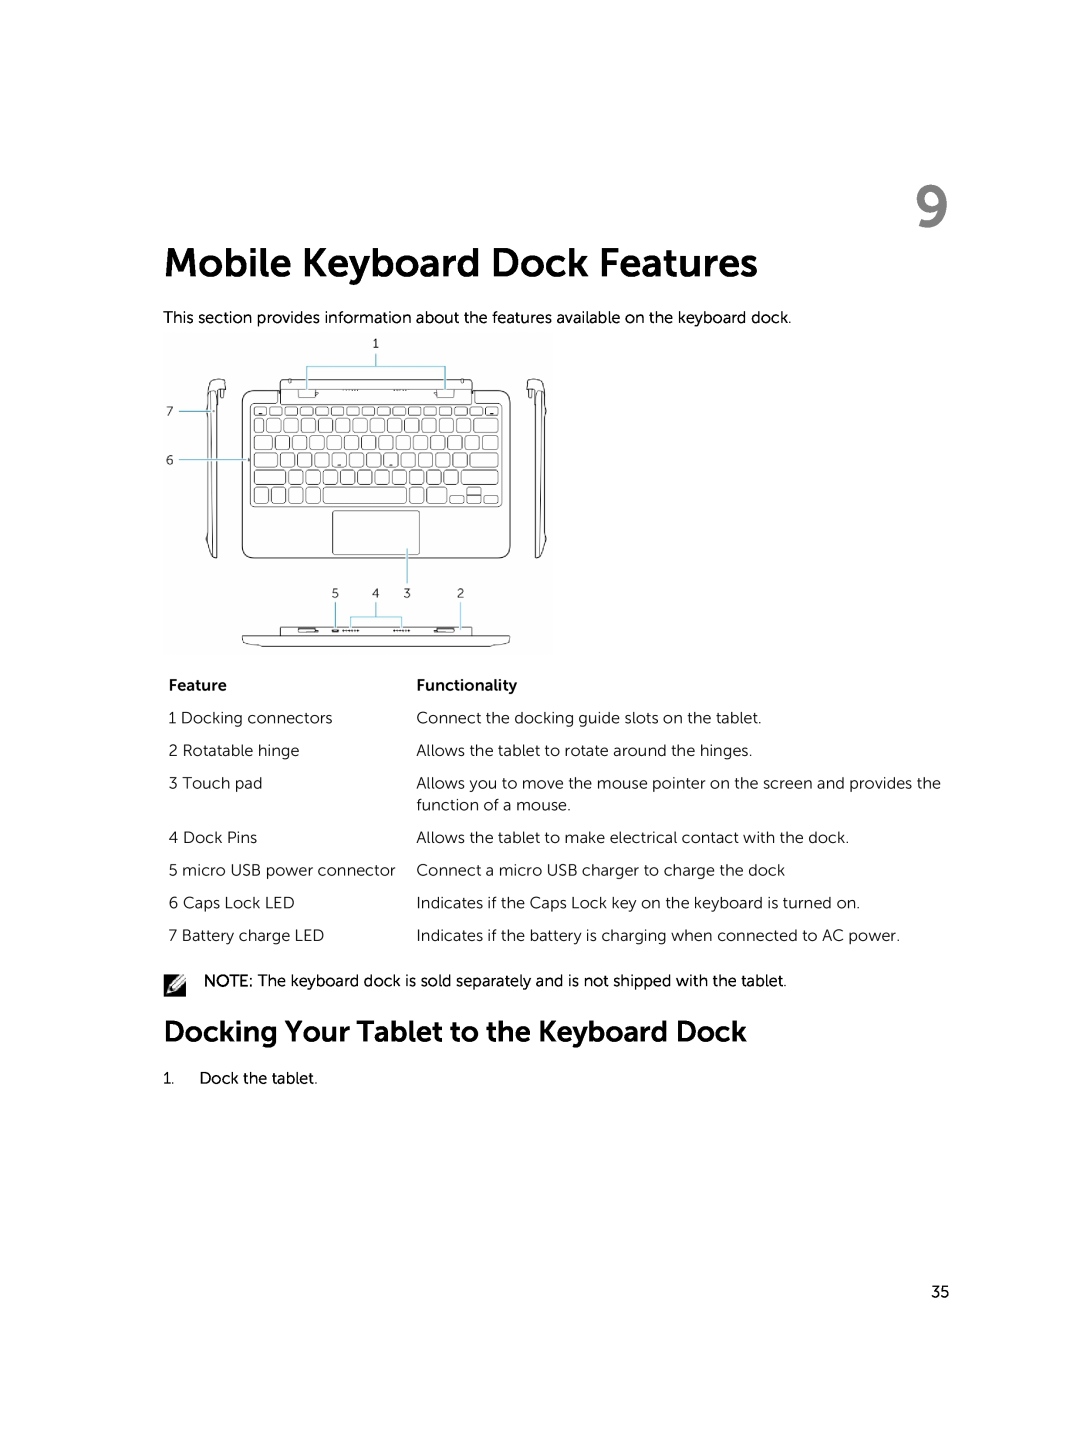 Dell PRO11I6363BLK, T07G manual Mobile Keyboard Dock Features, Docking Your Tablet to the Keyboard Dock 